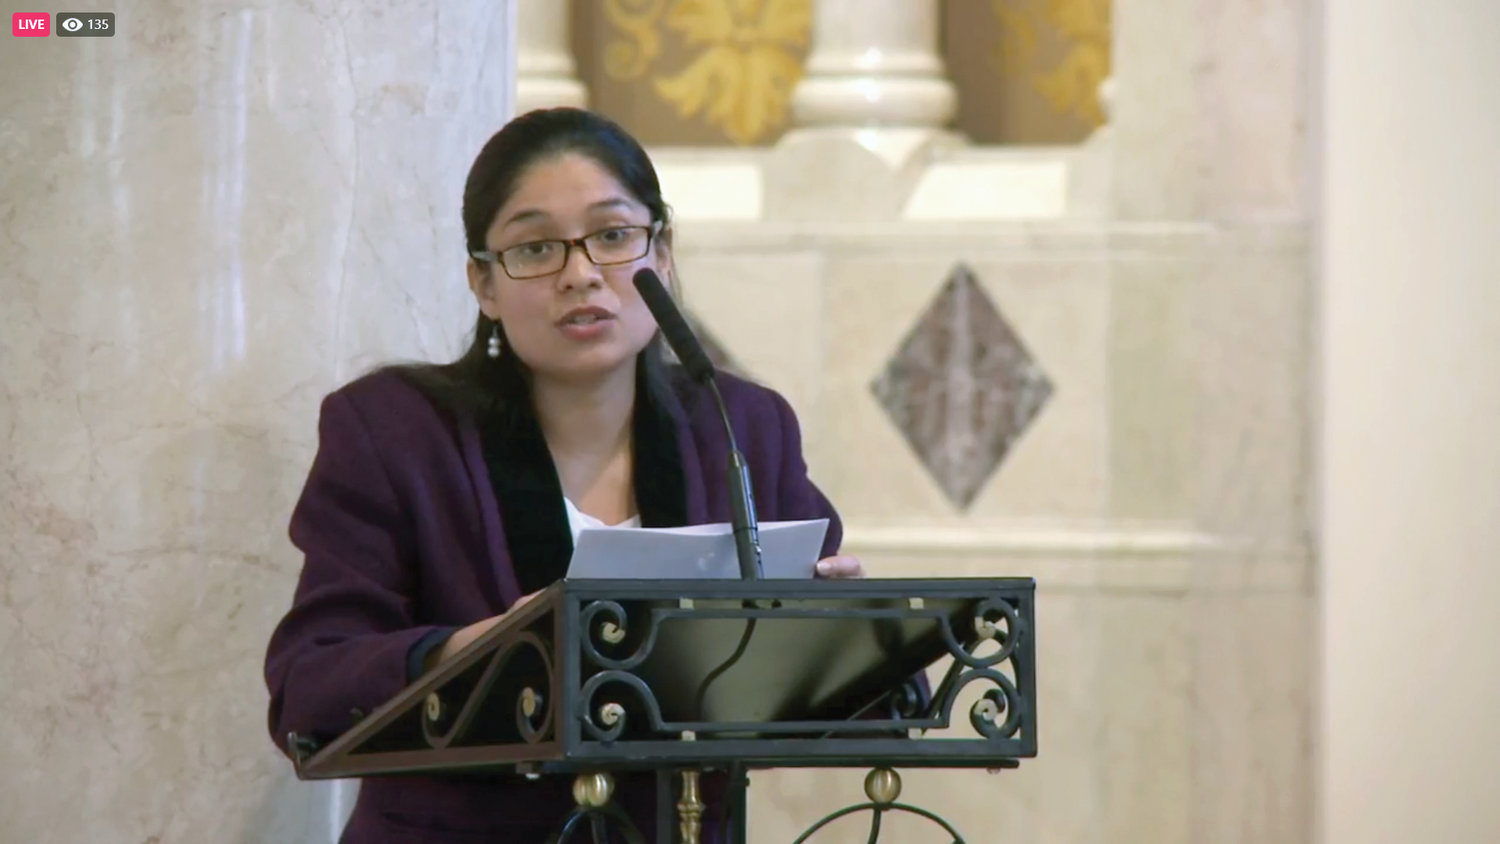 Elizabeth Guevara de Gonzalez, director of archdiocesan Adult Faith Formation, at the lectern, thanked the cardinal and auxiliary bishops who led the monthly livestreamed Holy Hours, which began in March 2020.